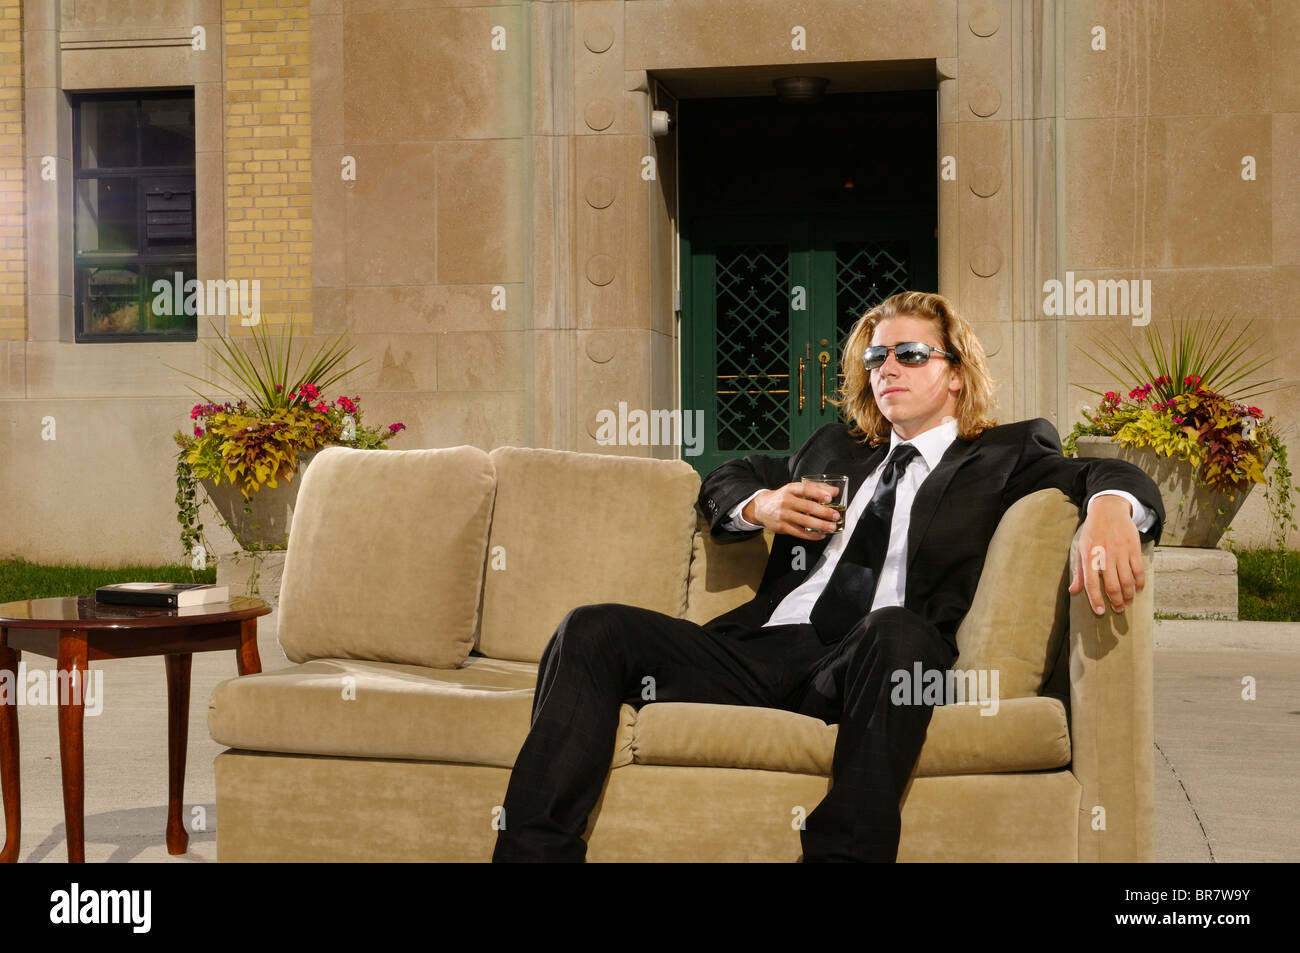 Wealthy young man with long blond hair in suit sitting on a couch with a drink on an outdoor terrace at a mansion Stock Photo